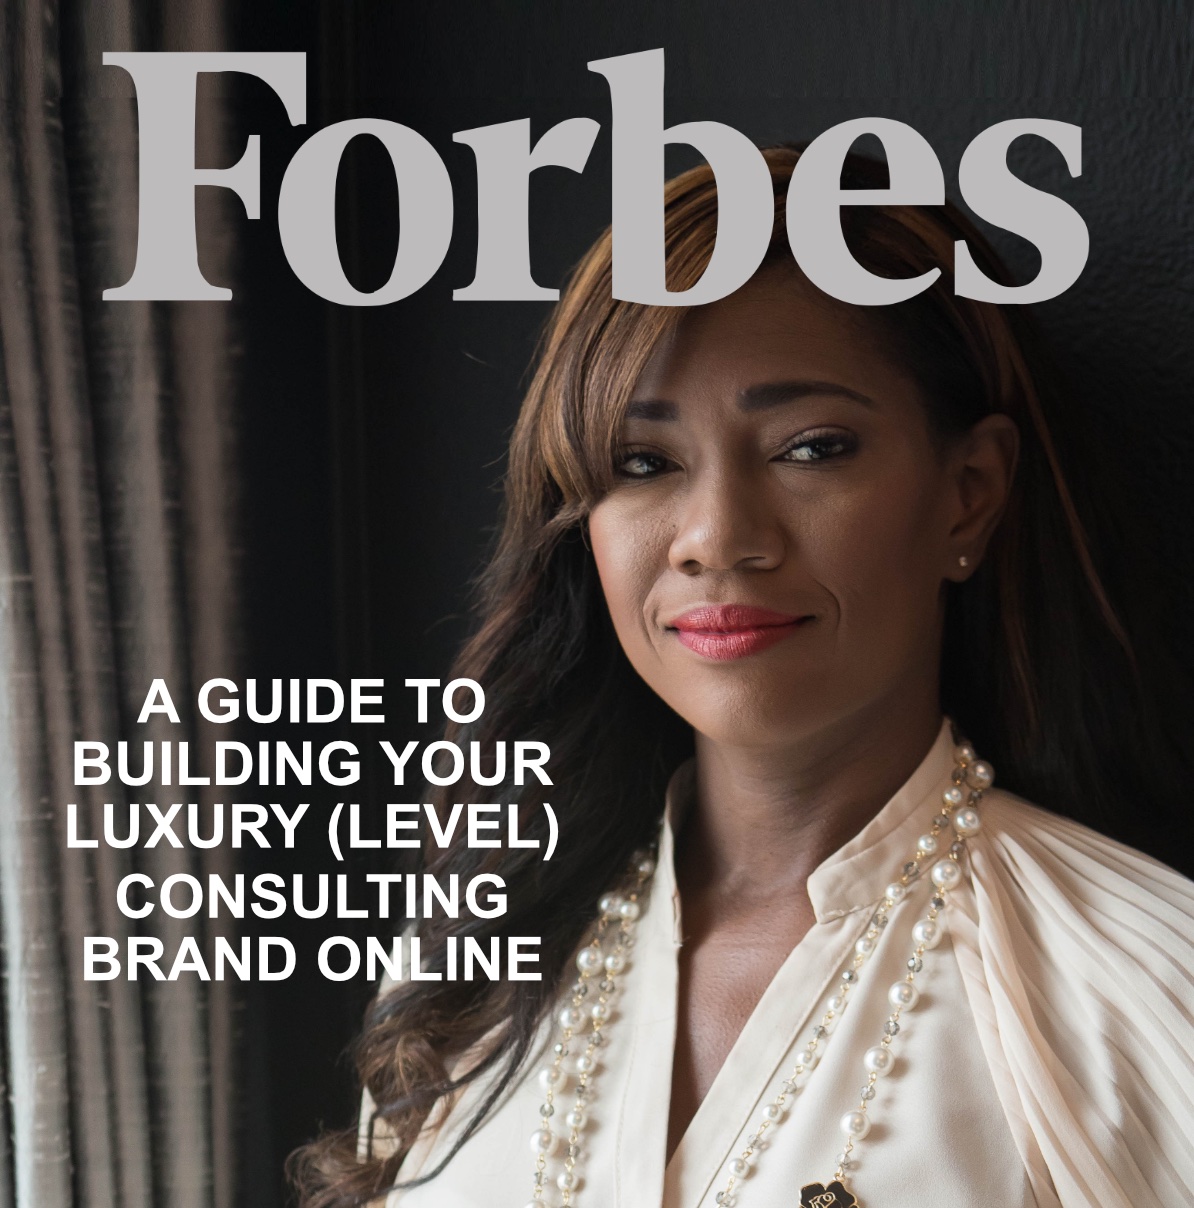 FORBES FEATURE